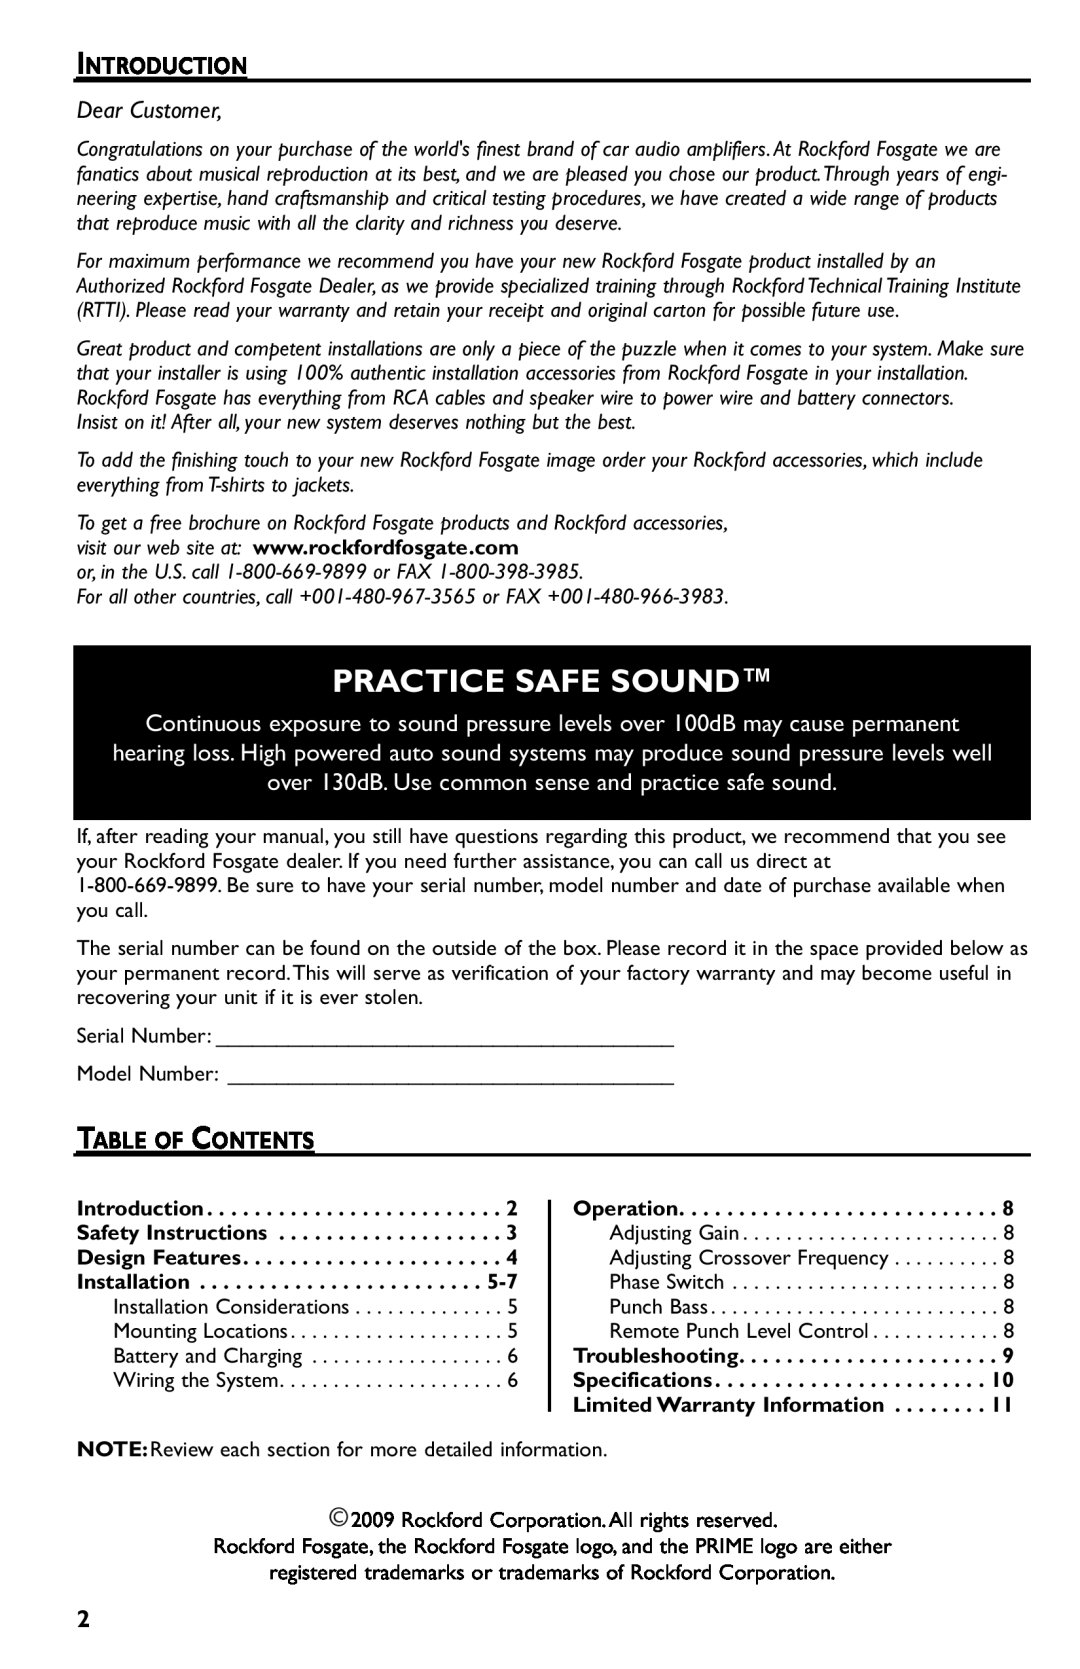 Rockford Fosgate R500-1 manual Practice Safe Sound, Introduction, Table Of Contents 